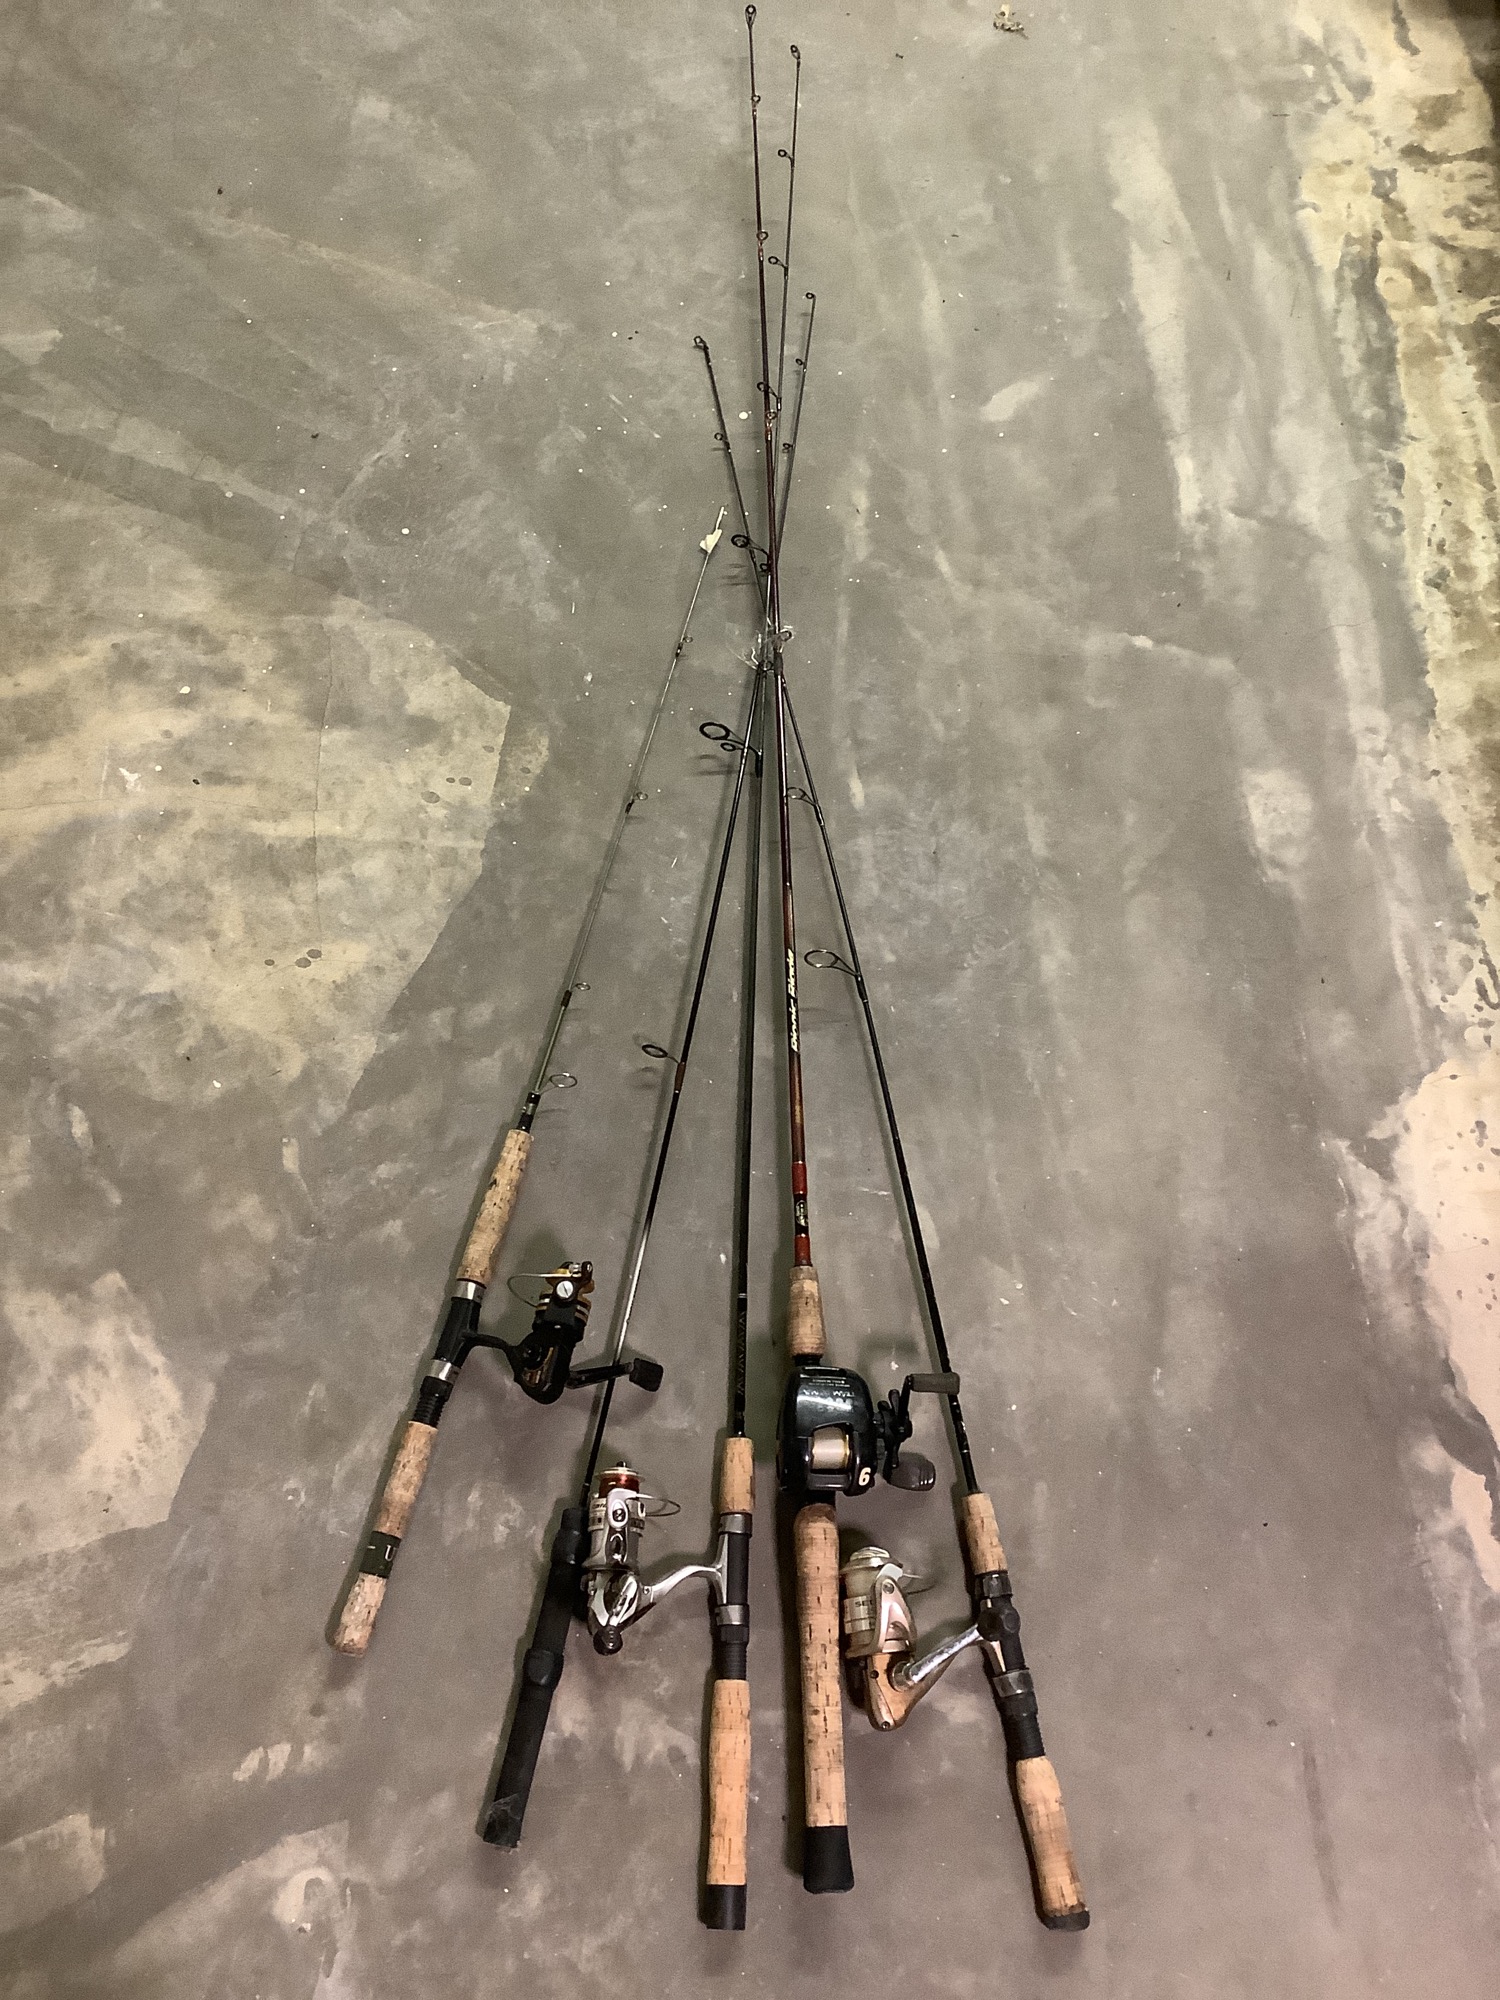 Rod and Reel Fishing Gear Combo Mitchell 320 reel Gander Mountain